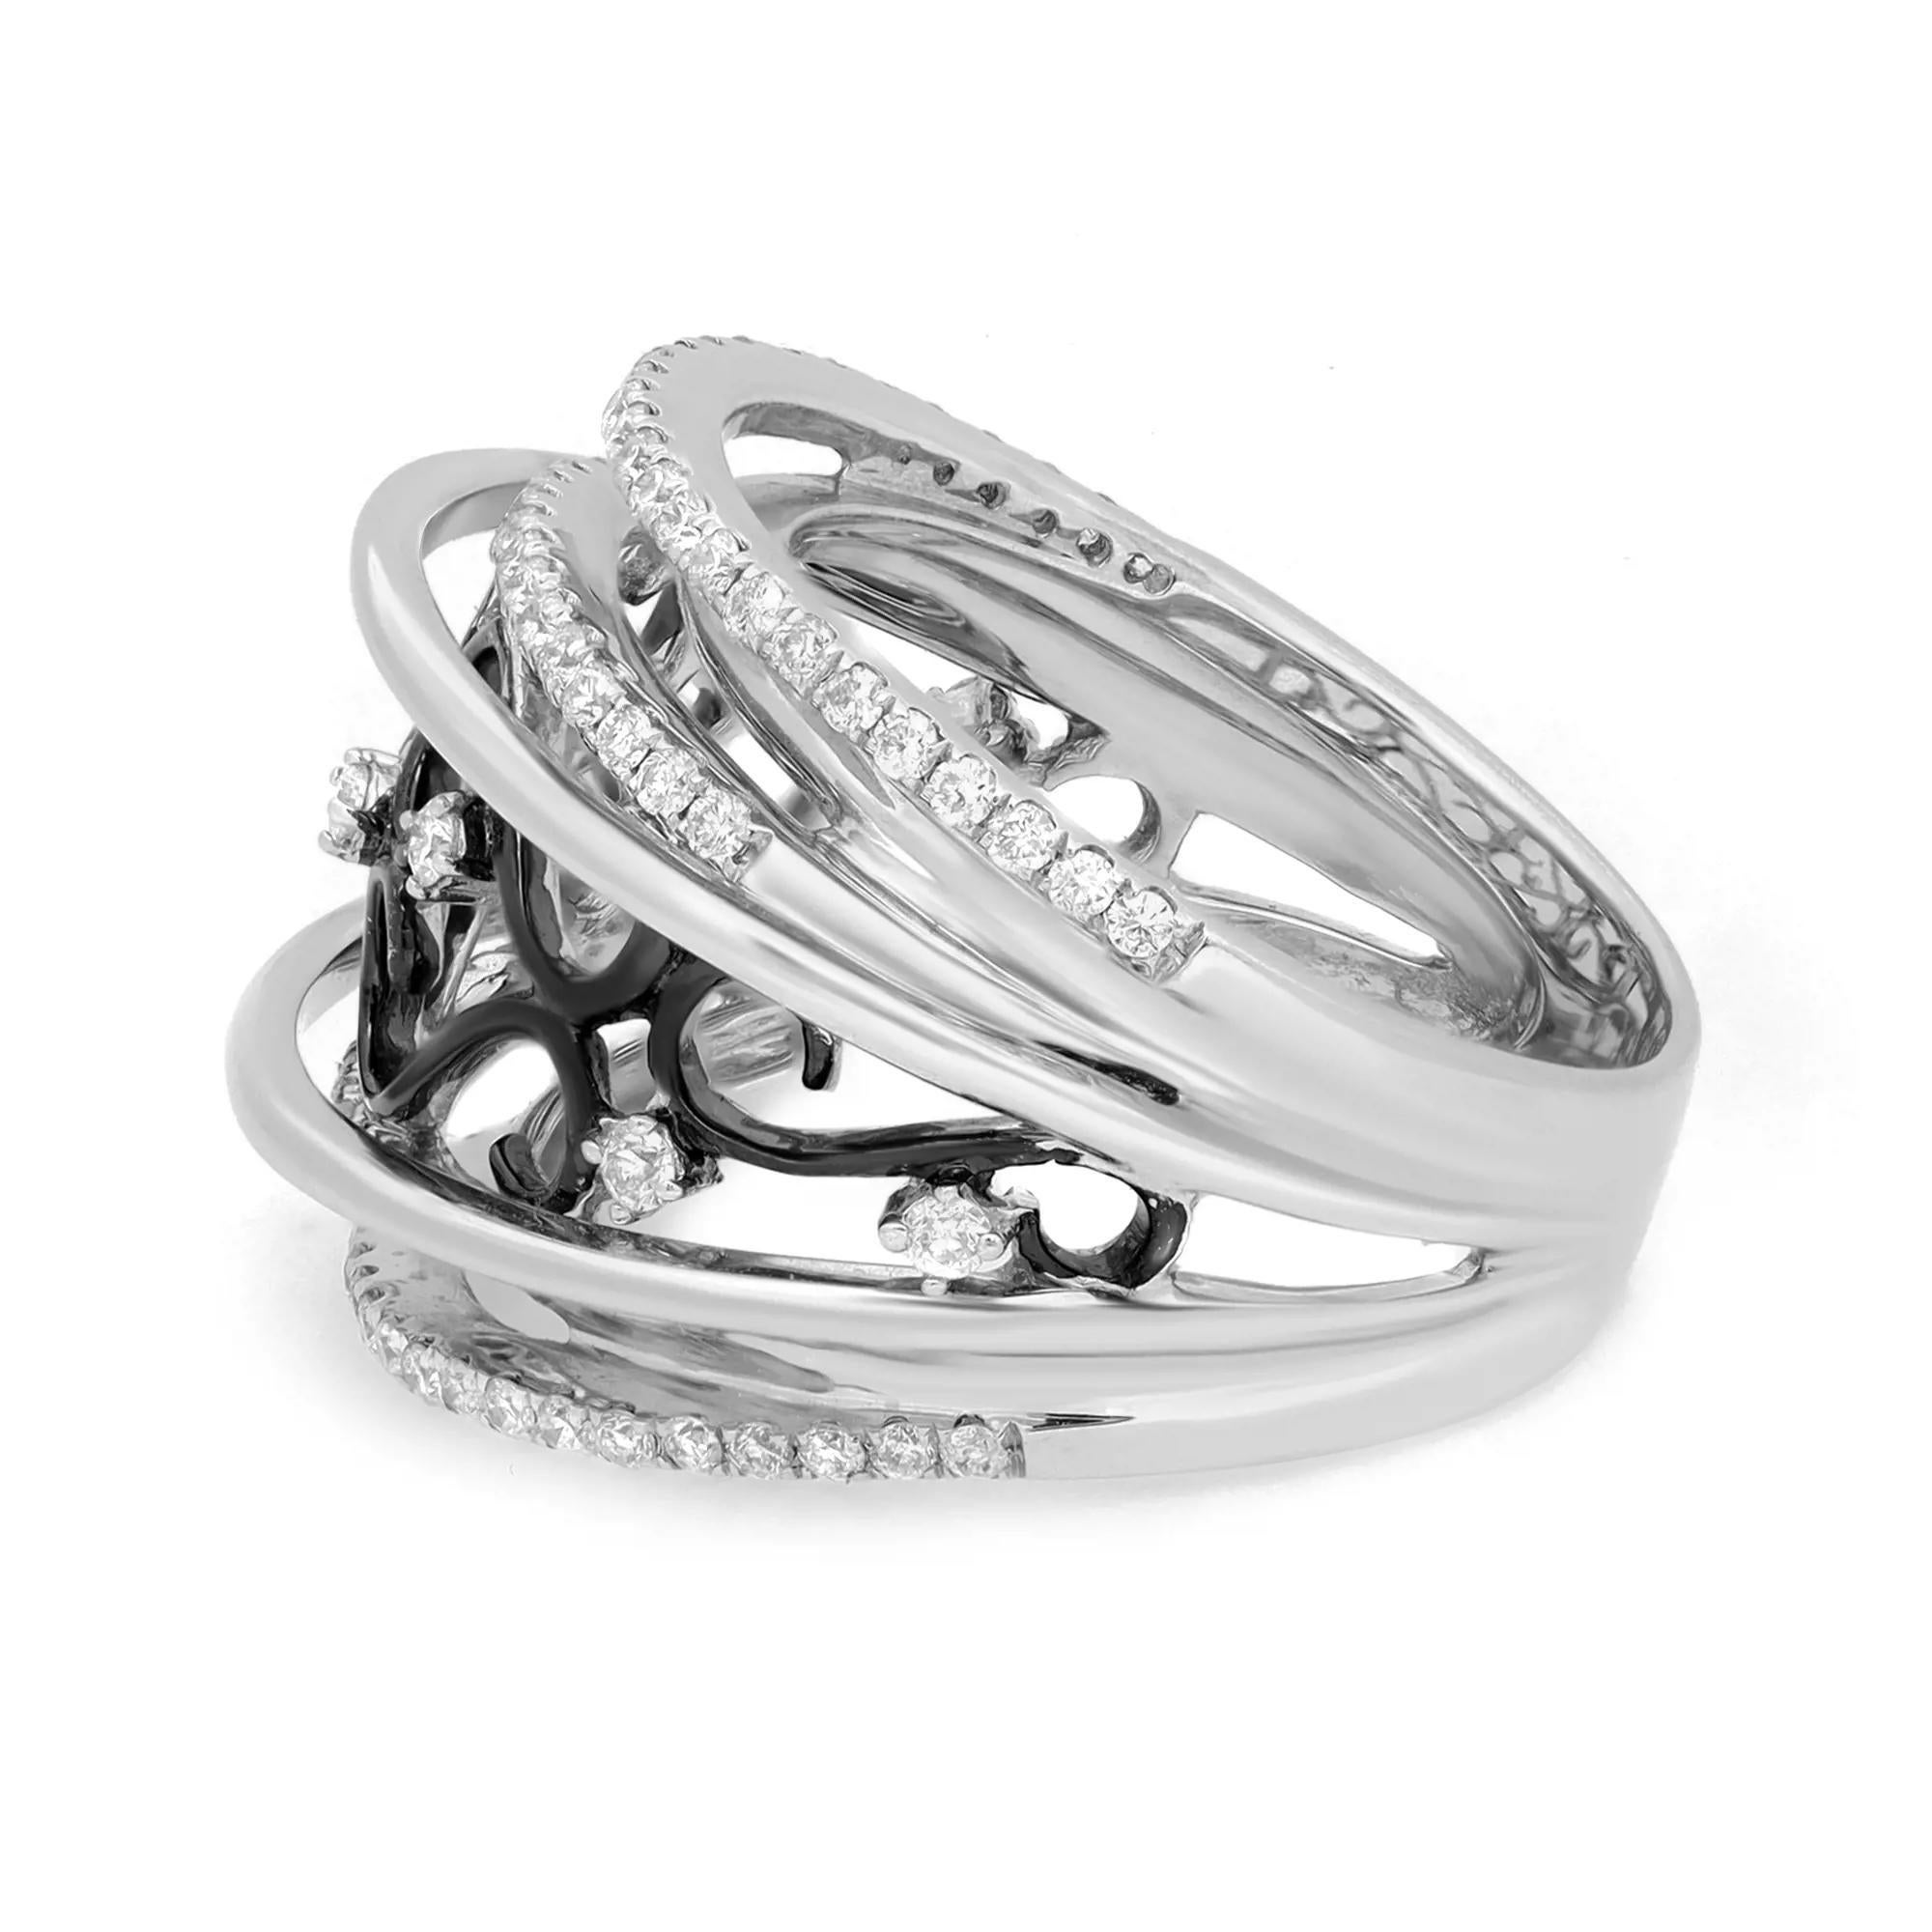 This stunning one of a kind wide cocktail band ring is crafted in 14k white gold. It features dark rhodium plated intricate filigree design with prong set round brilliant cut diamonds weighing 0.84 carat. Ring size: 7.25. Total weight: 13.43 grams.